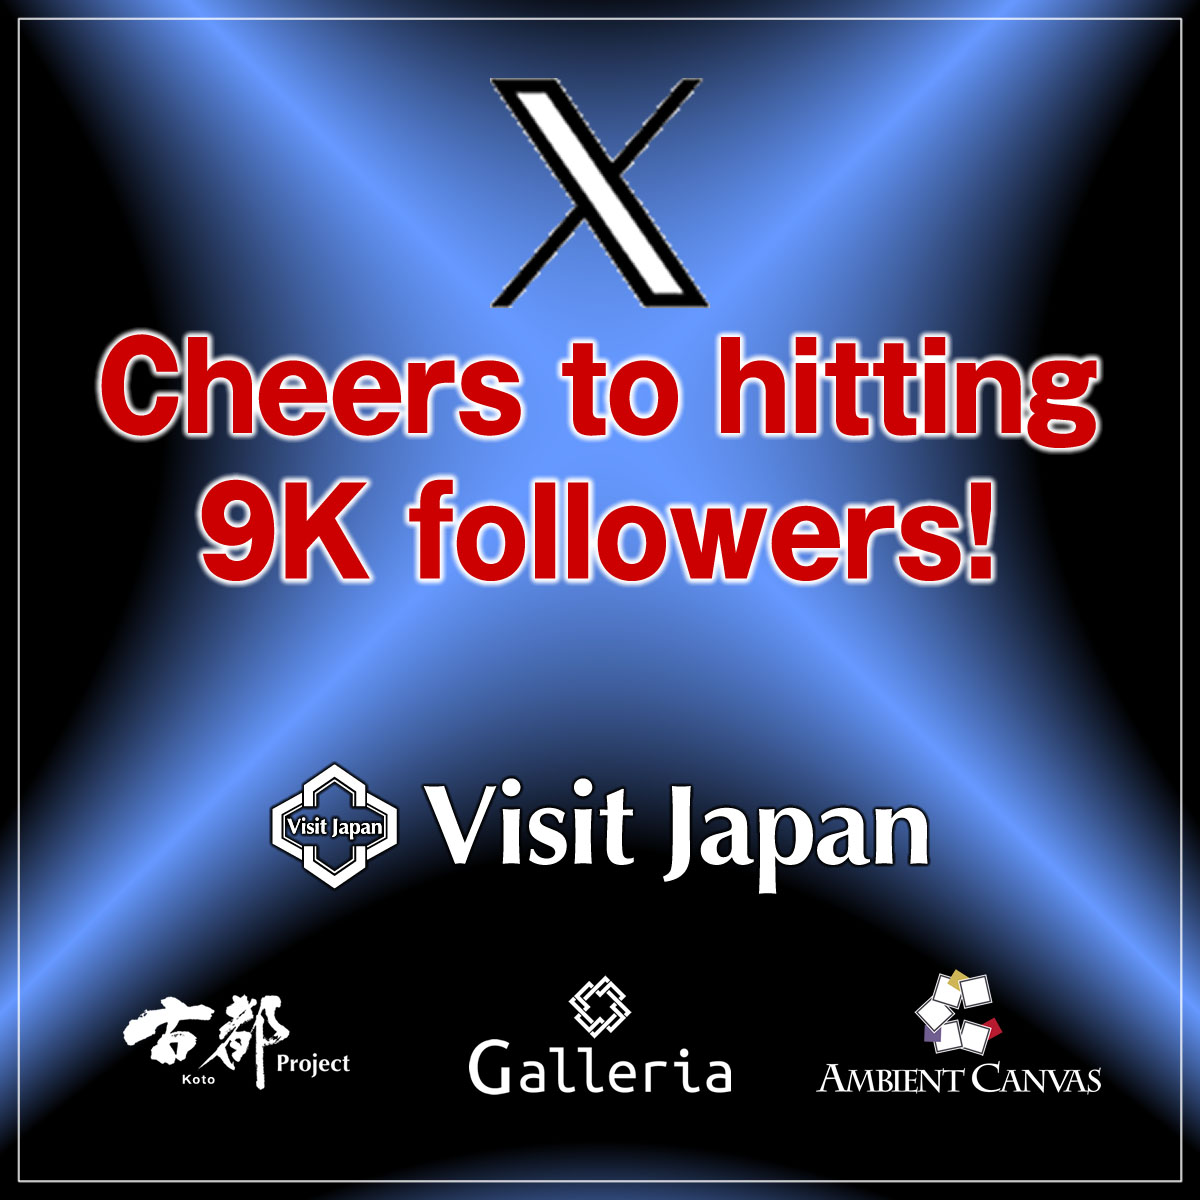 Visit Japan in the Metaverse! Come join us for an immersive experience and let's connect. Interaction sparks creativity and ideas! 🇯🇵✨ #Japaneseculture #JapanExperience #9Kフォロワー #メタバース